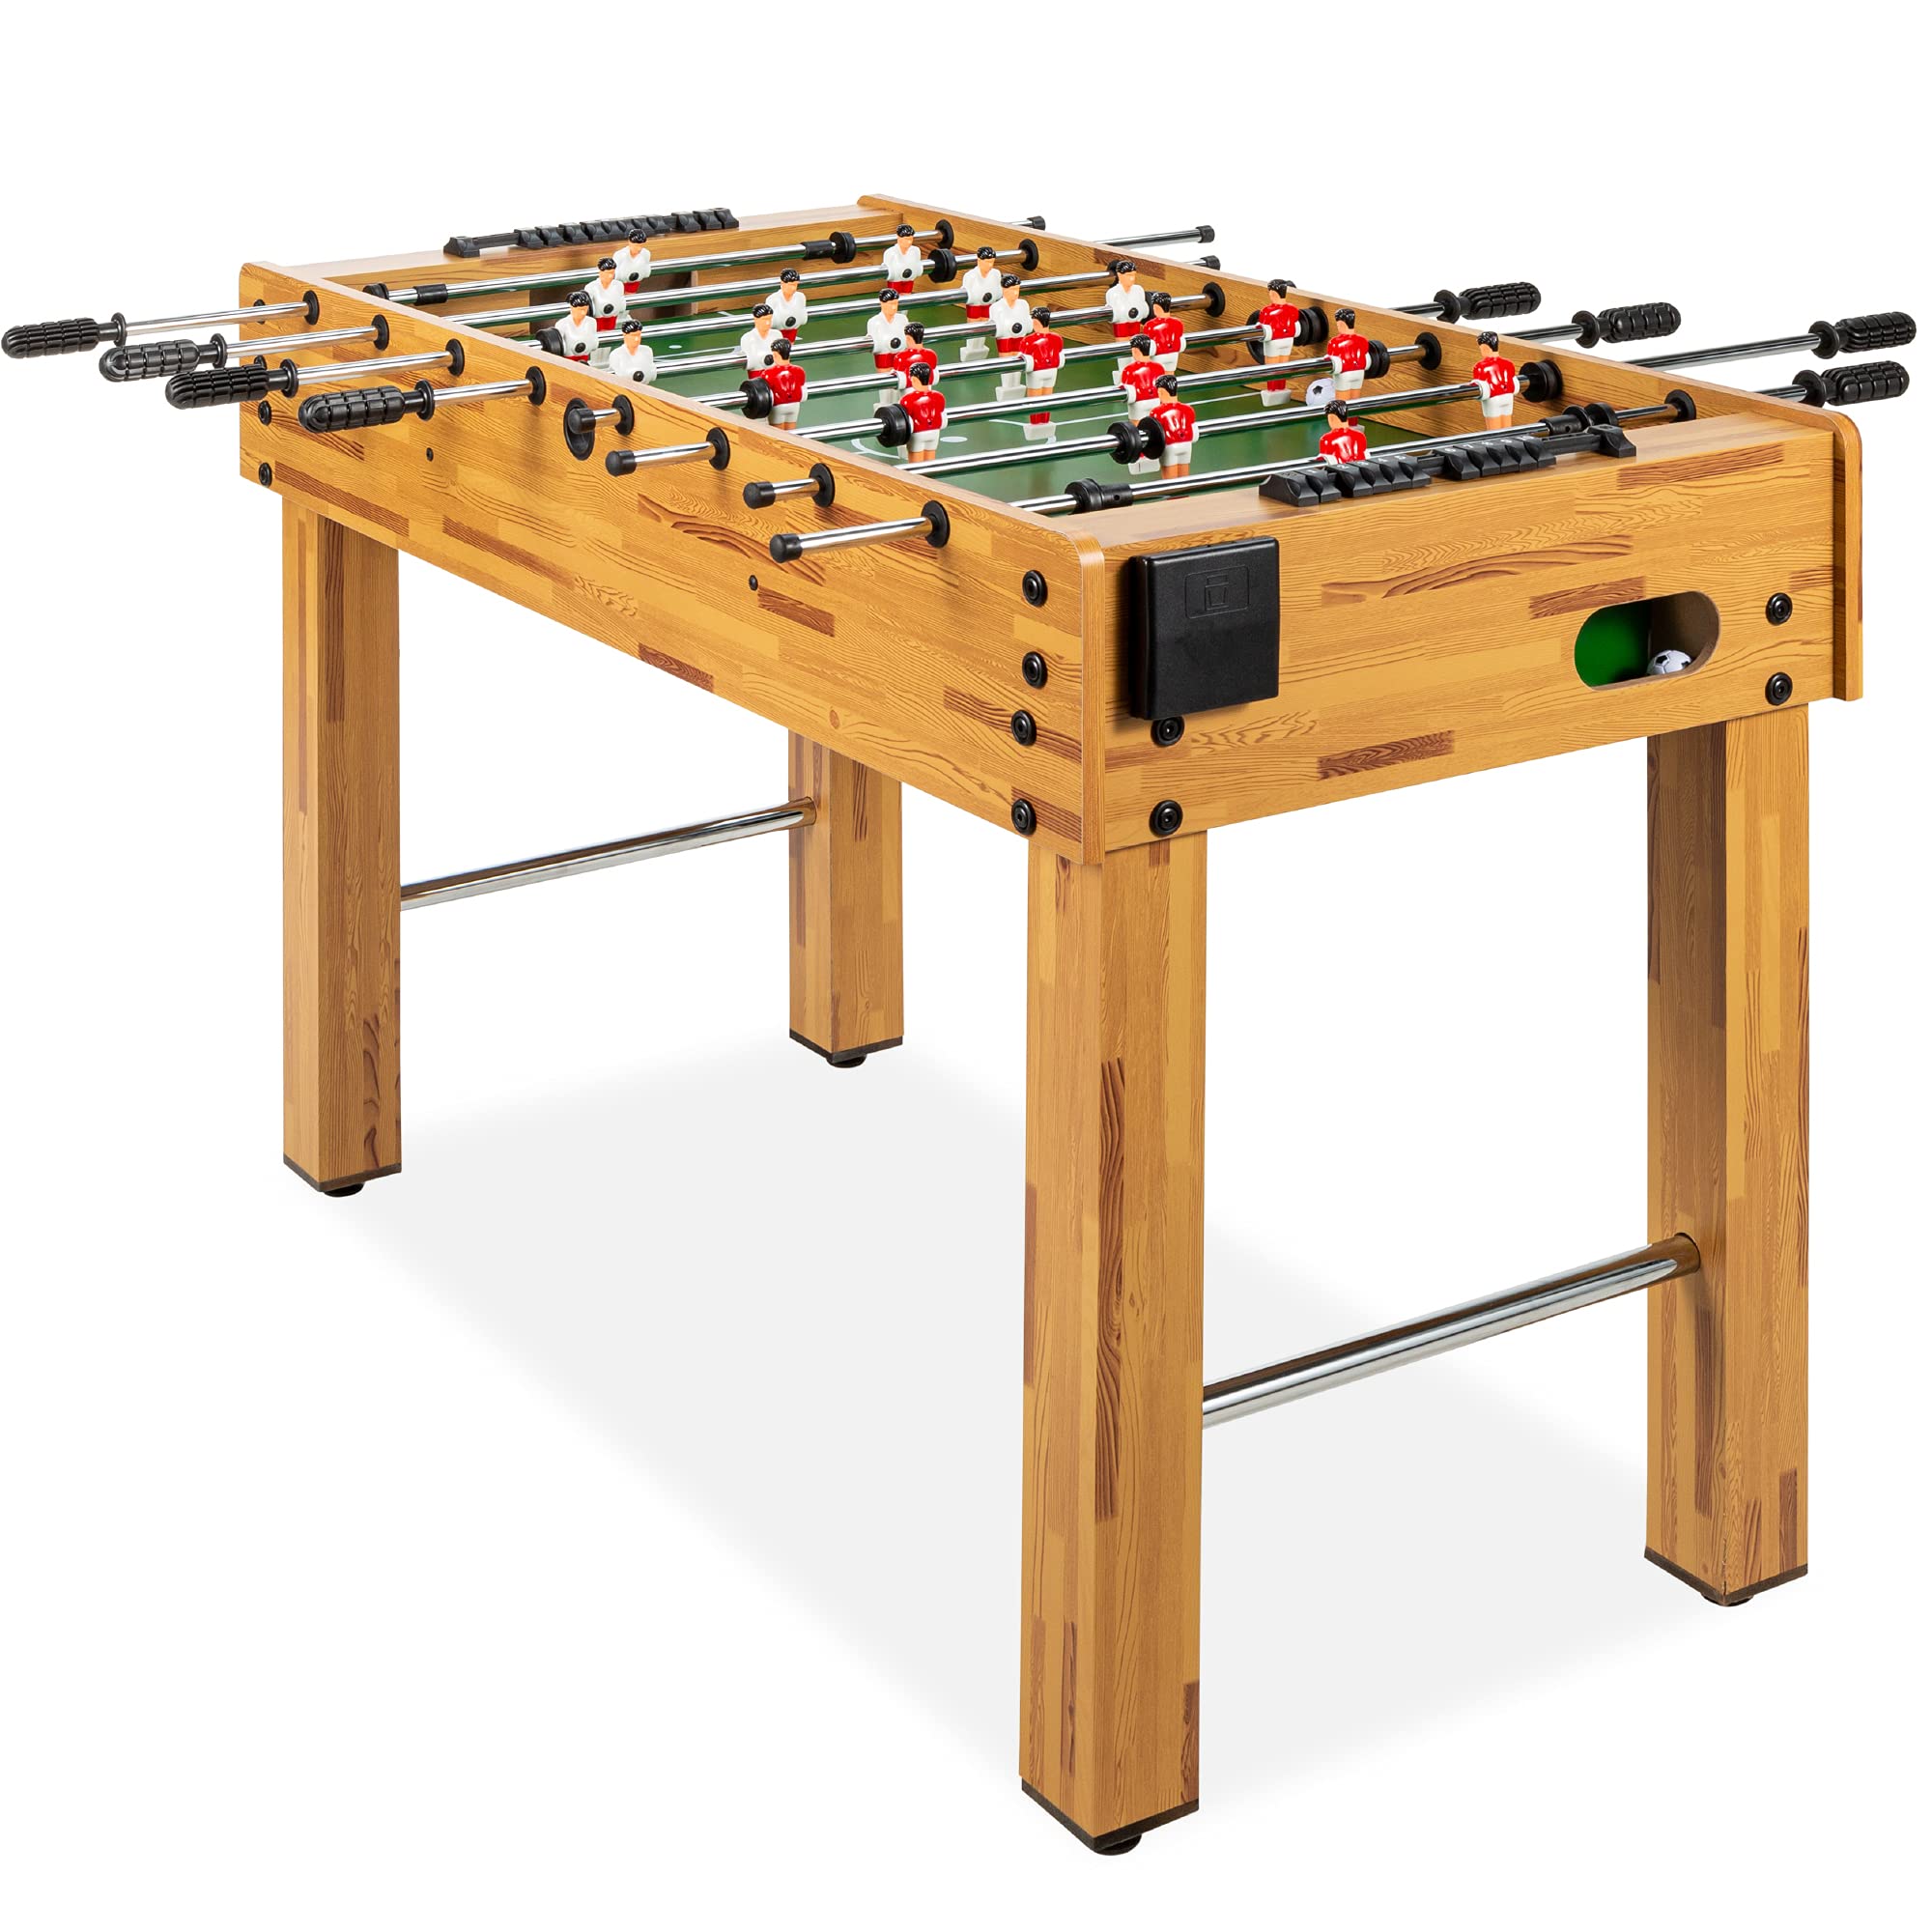 Wooden Best Choice Products 48-inch Foosball table